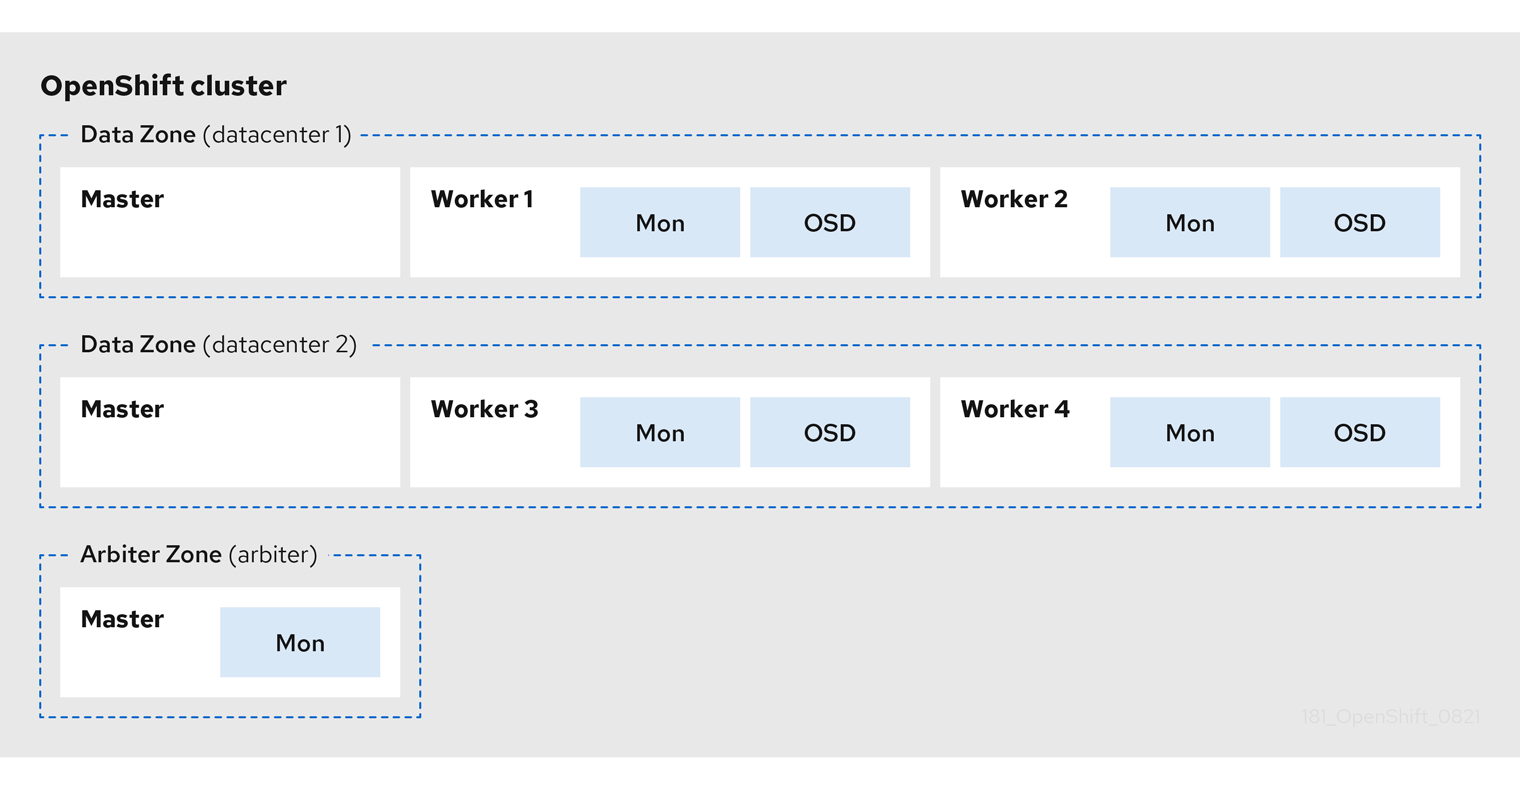 OpenShift nodes and OpenShift Container Storage daemons